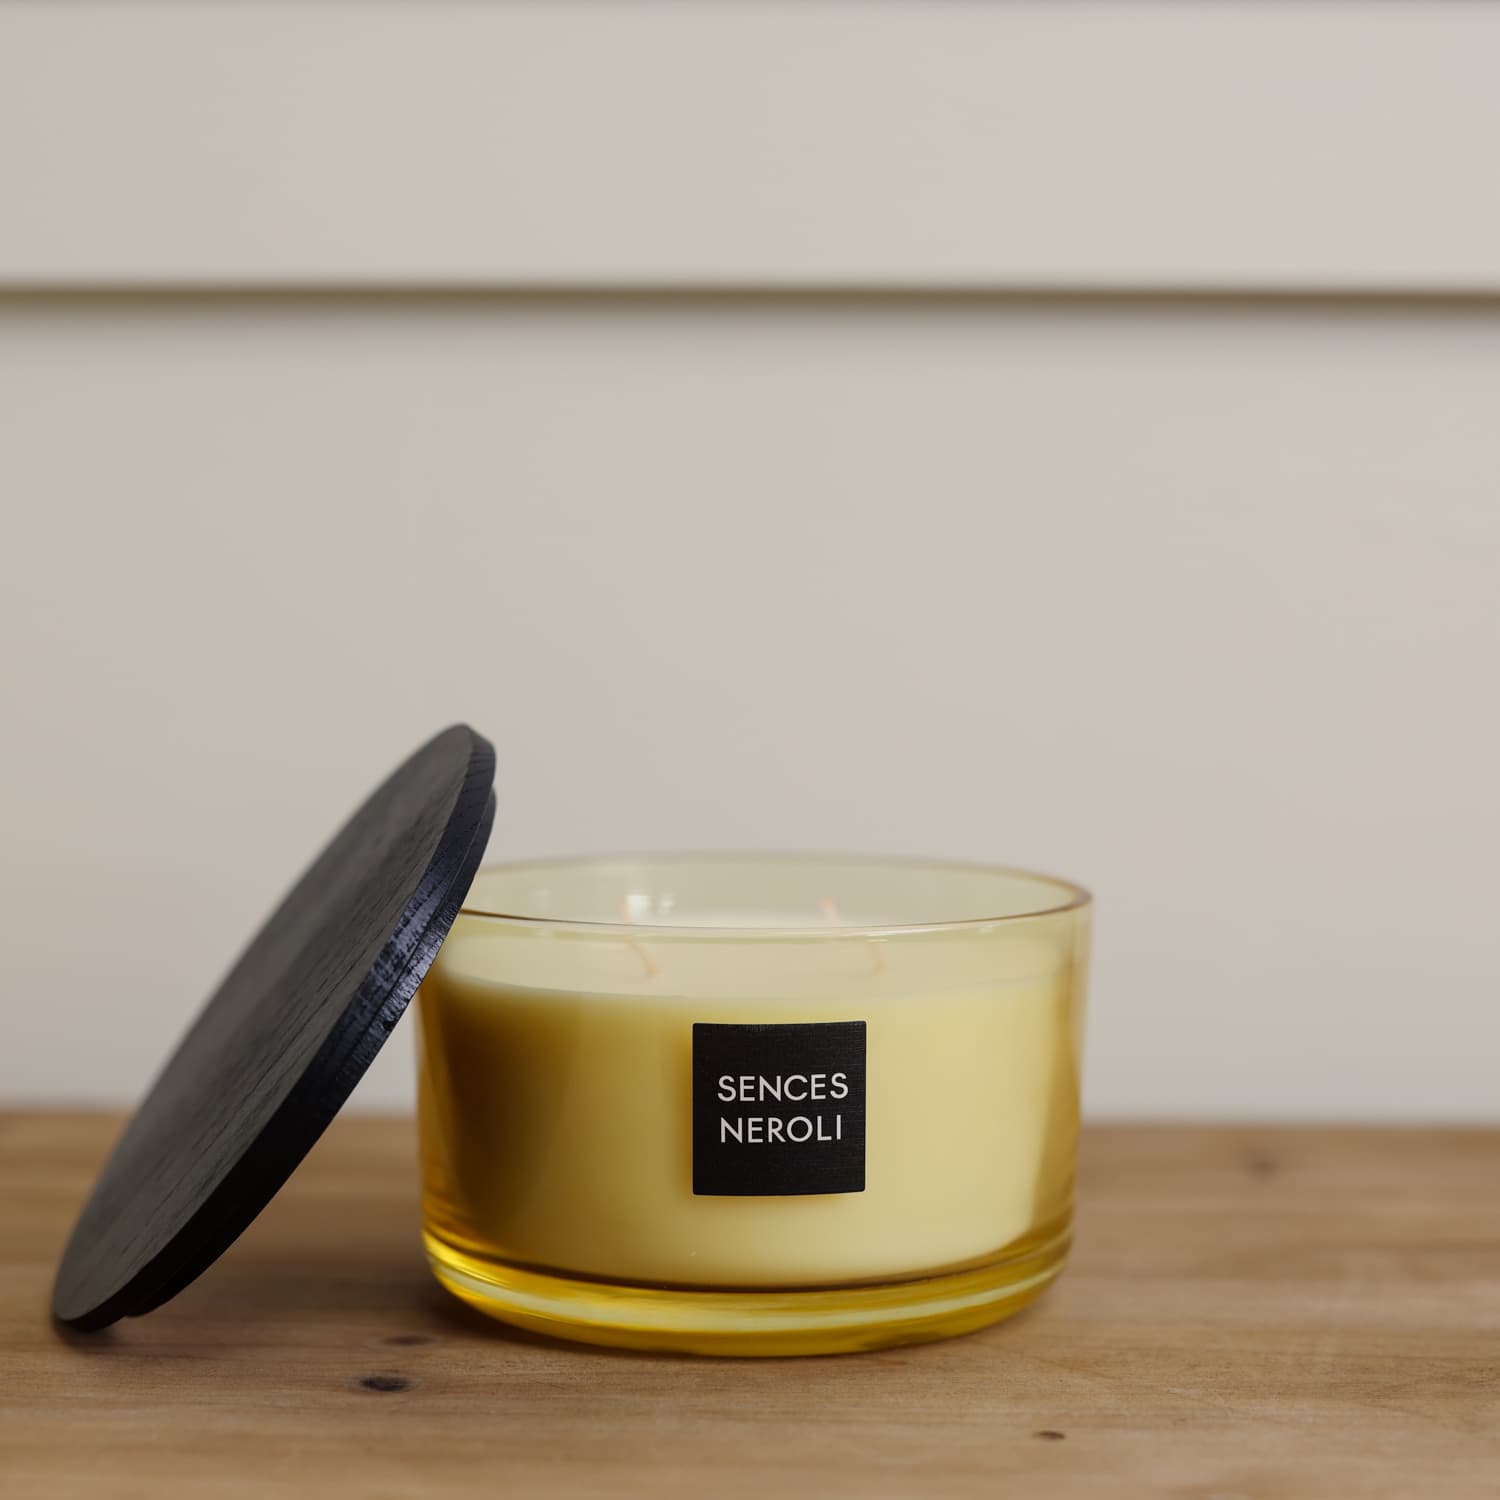 Sences Neroli Lidded Candle with lid rested on the side on wooden console.